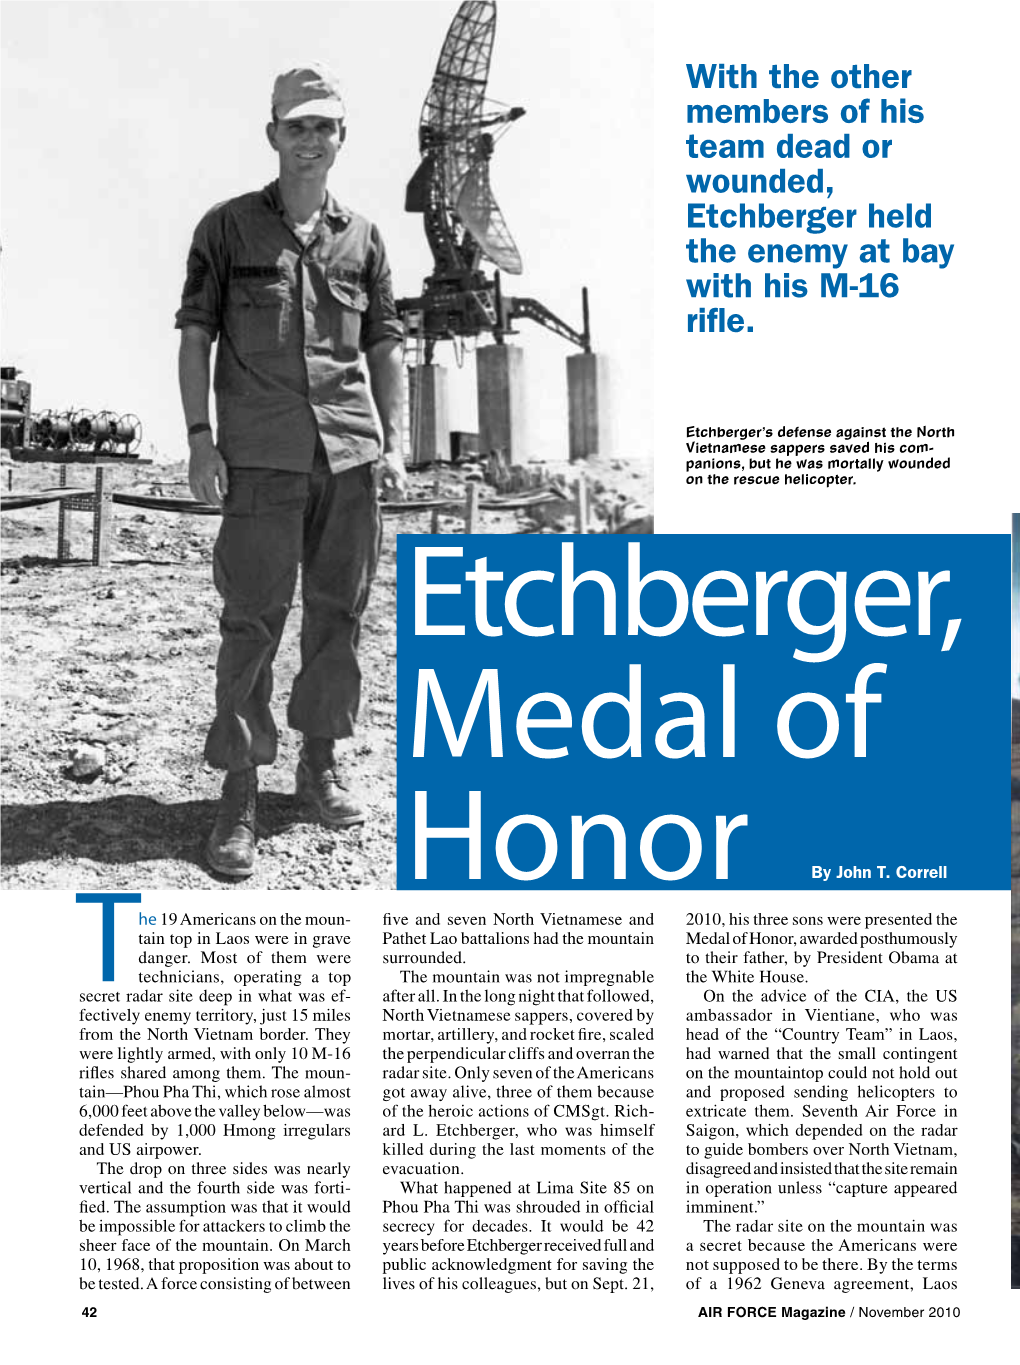 Etchberger, Medal of Honor by John T. Correll